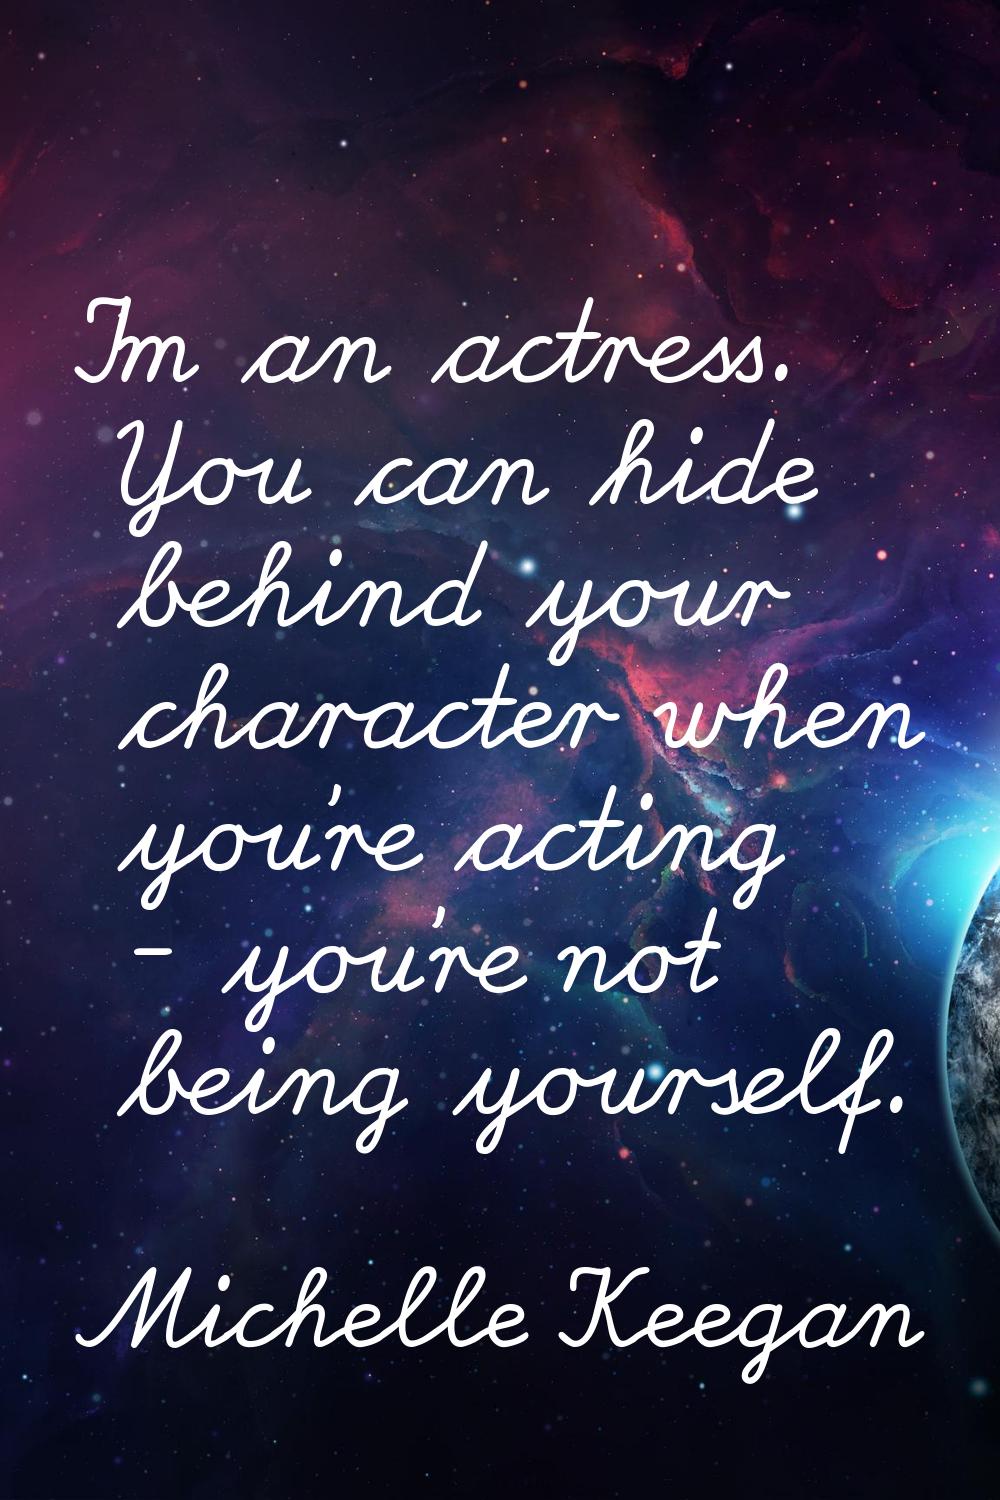 I'm an actress. You can hide behind your character when you're acting - you're not being yourself.